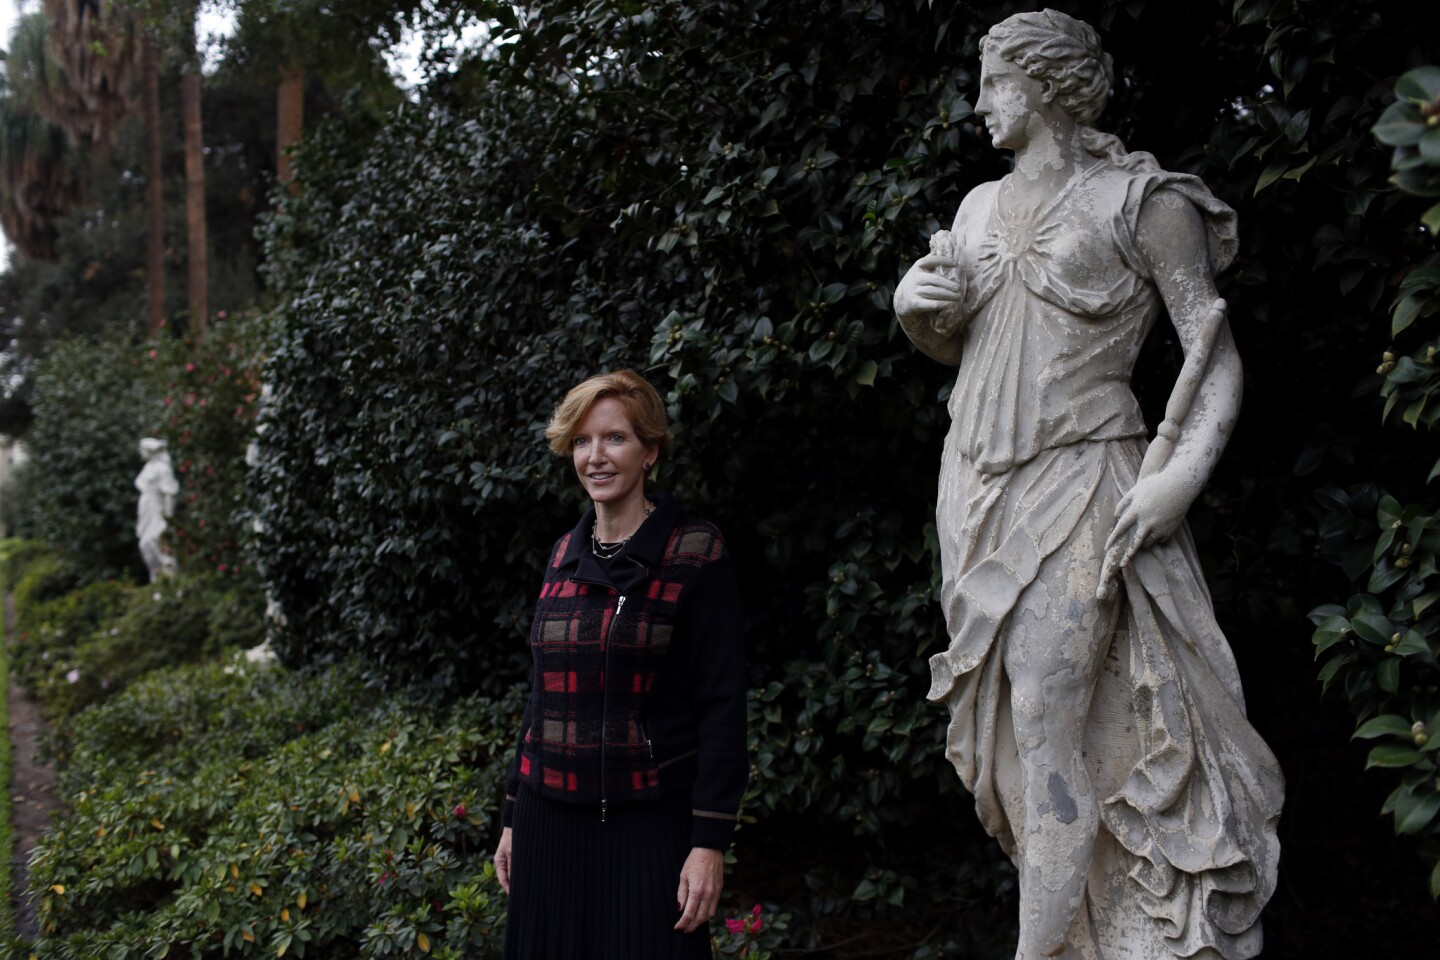 Laura Skandera Trombley at the Huntington Library in San Marino. On Dec. 2 it was announced that Trombley will succeed Steven Koblik as president of the Huntington Library, Art Collection and Botanical Gardens.